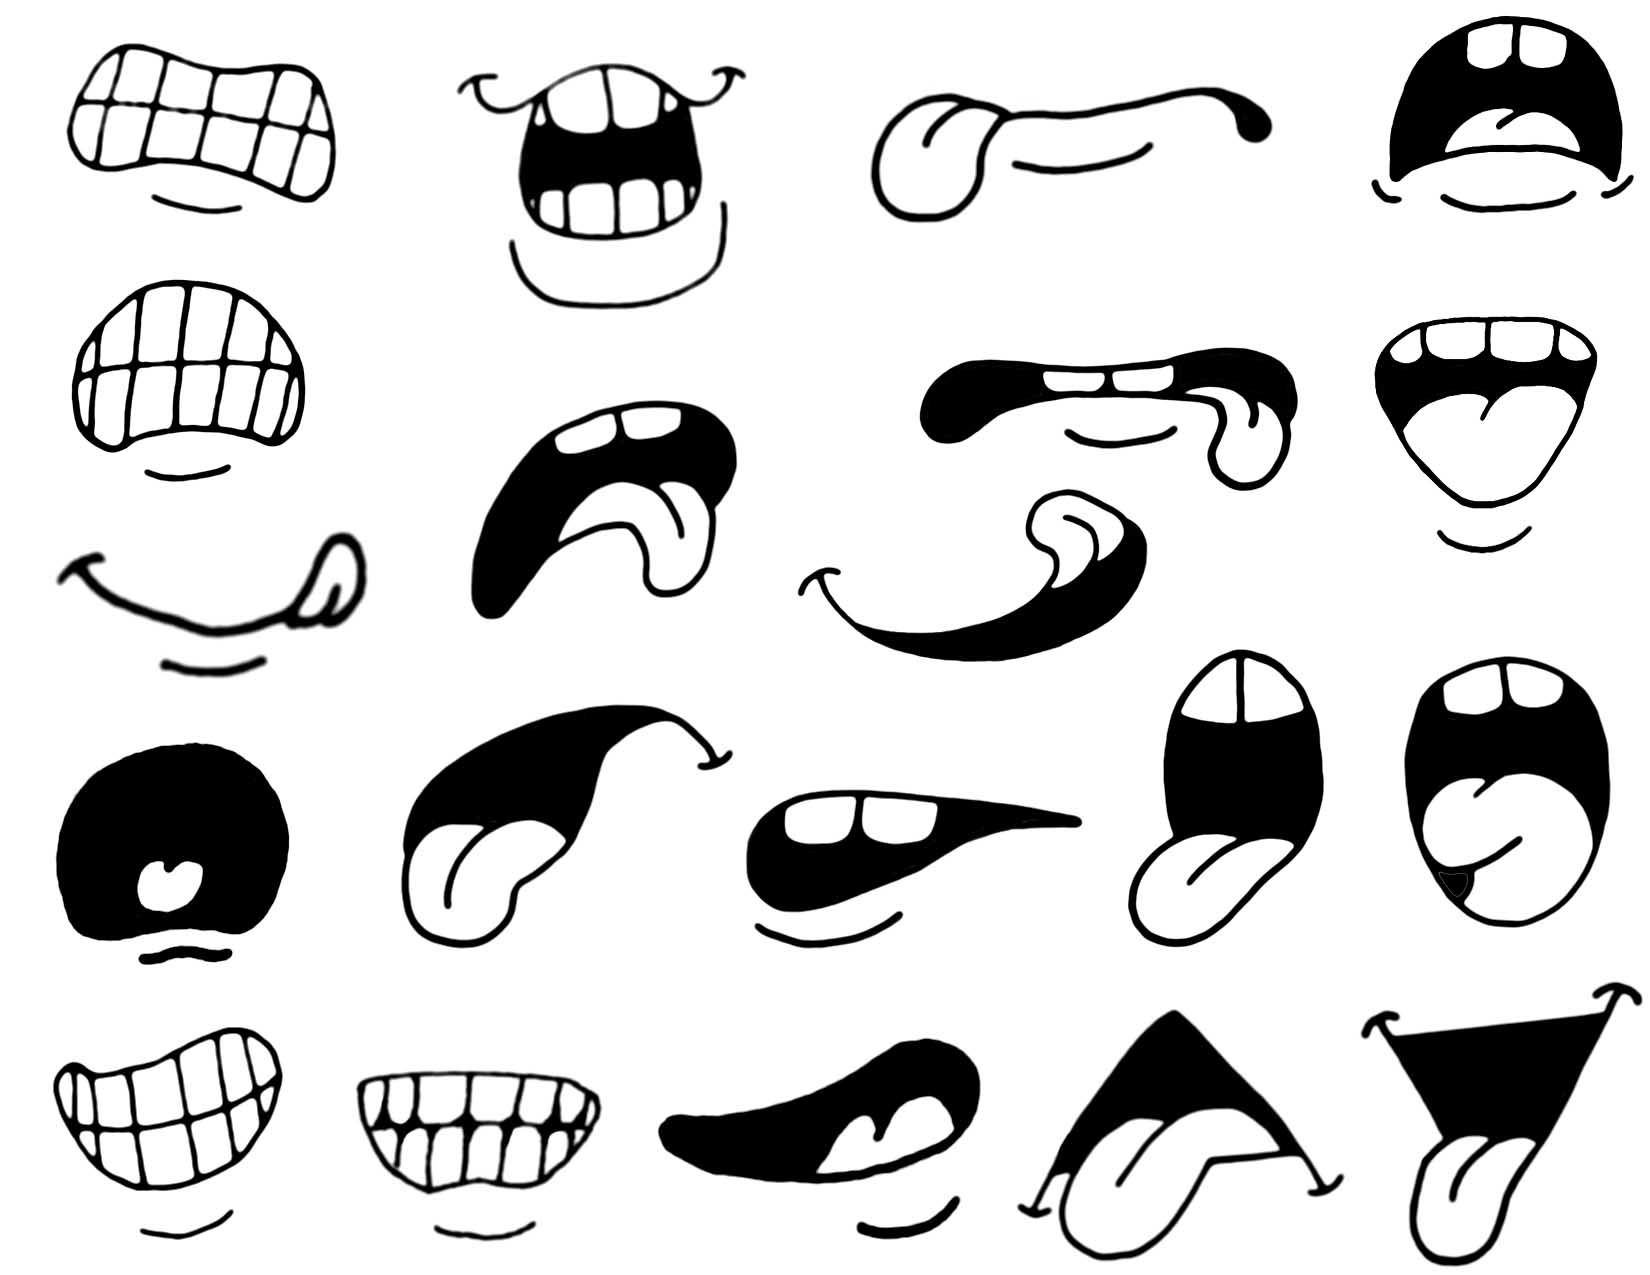 How to Draw Cartoon Mouths.